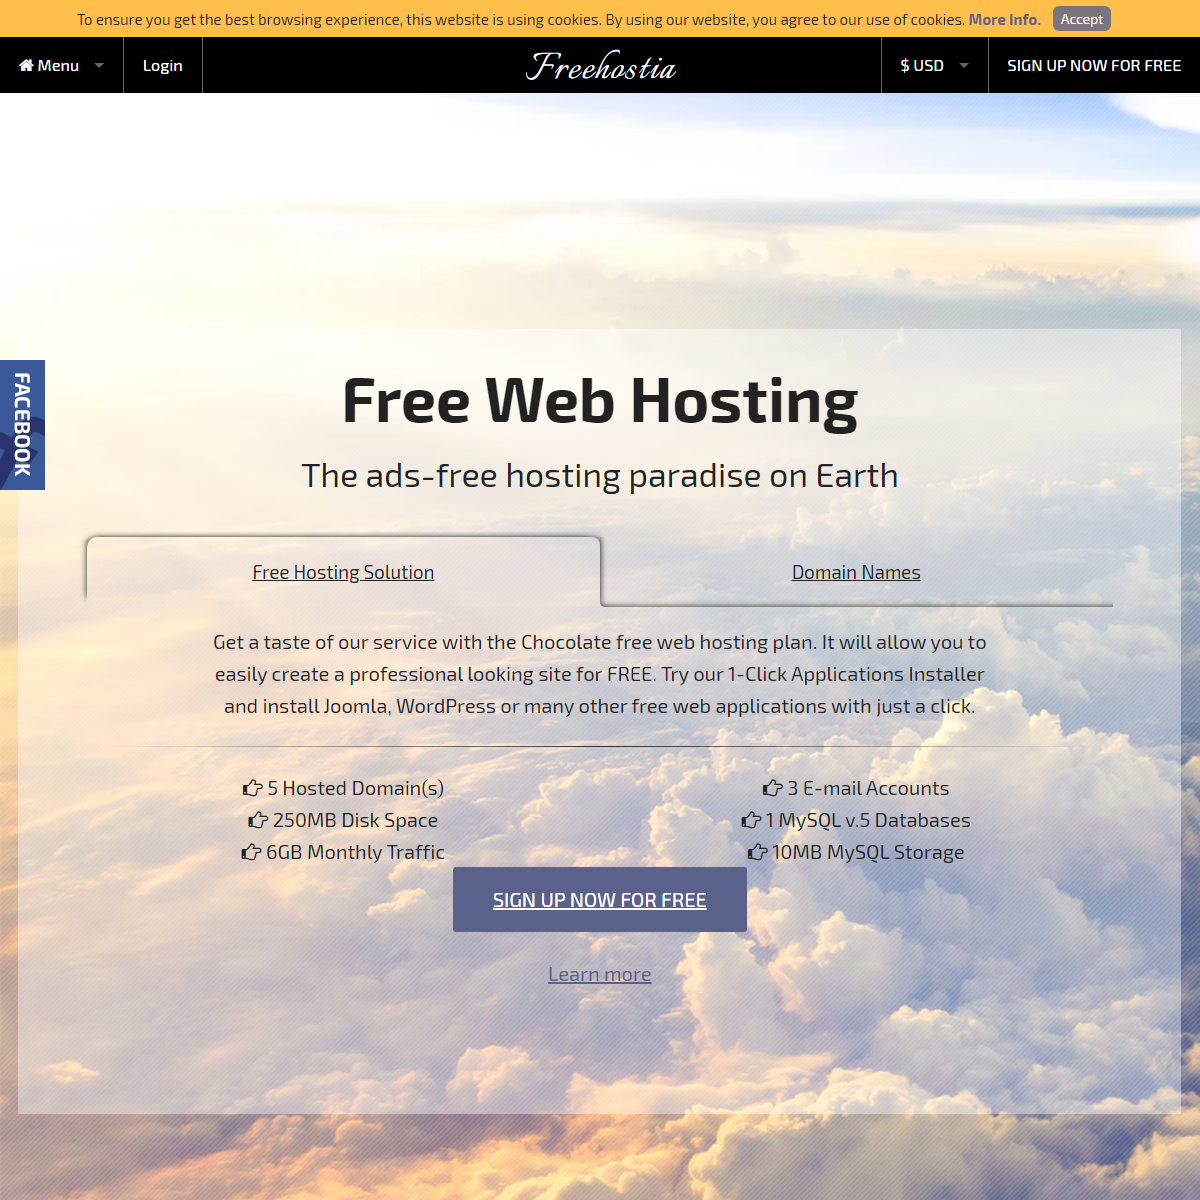 A complete backup of https://www.freehostia.com/